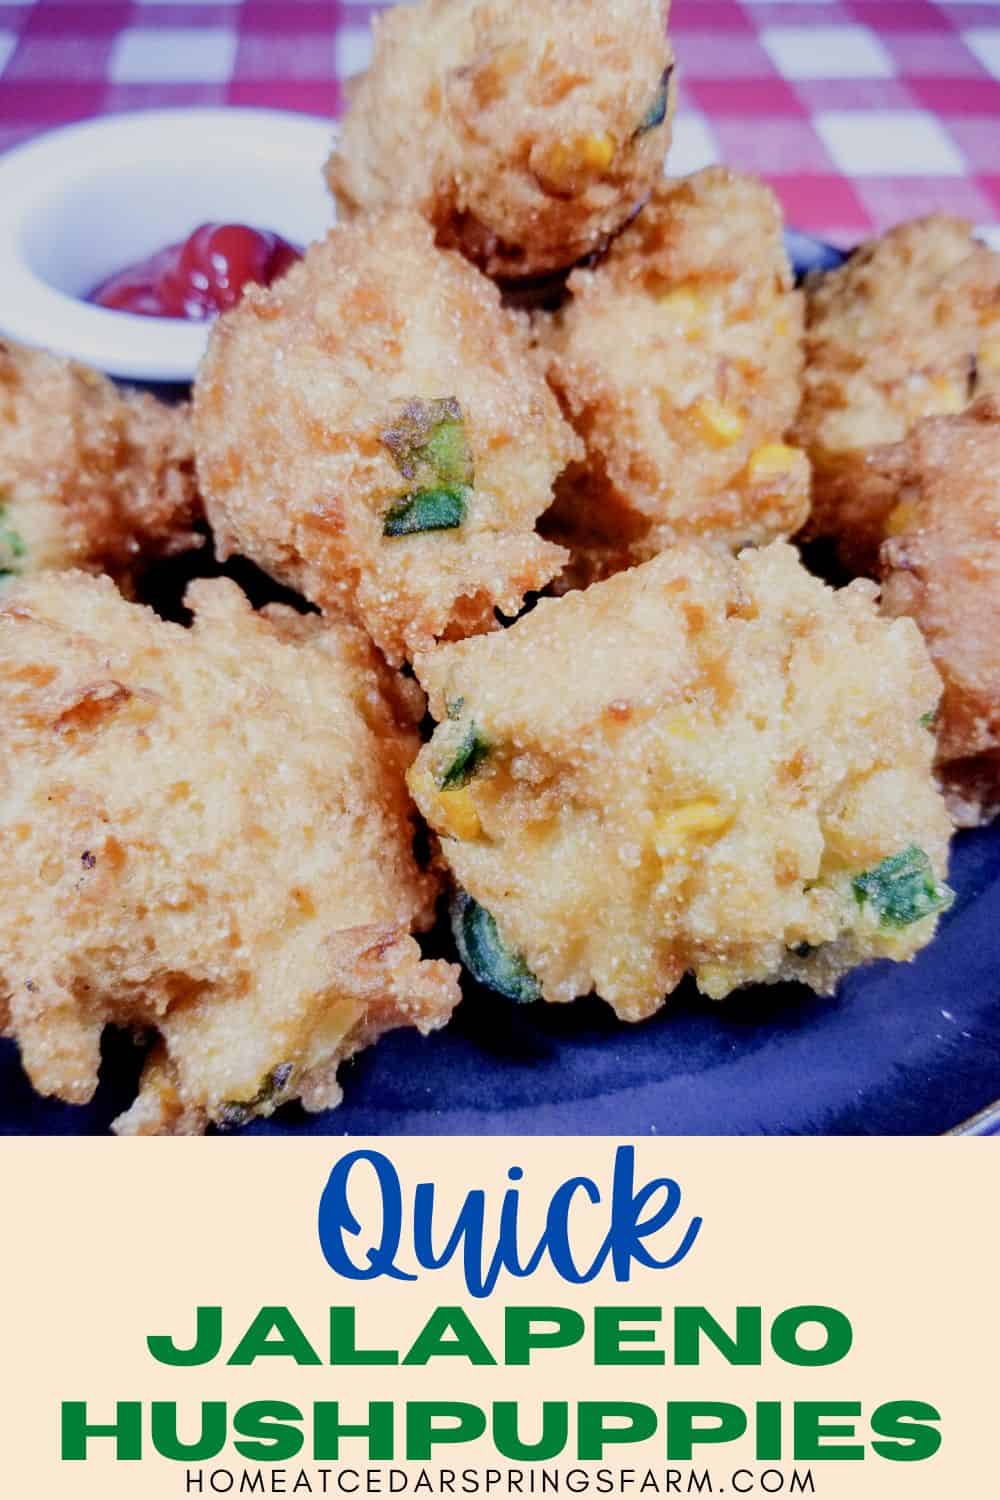 Quick Jalapeno Hushpuppies on a plate with text overlay.